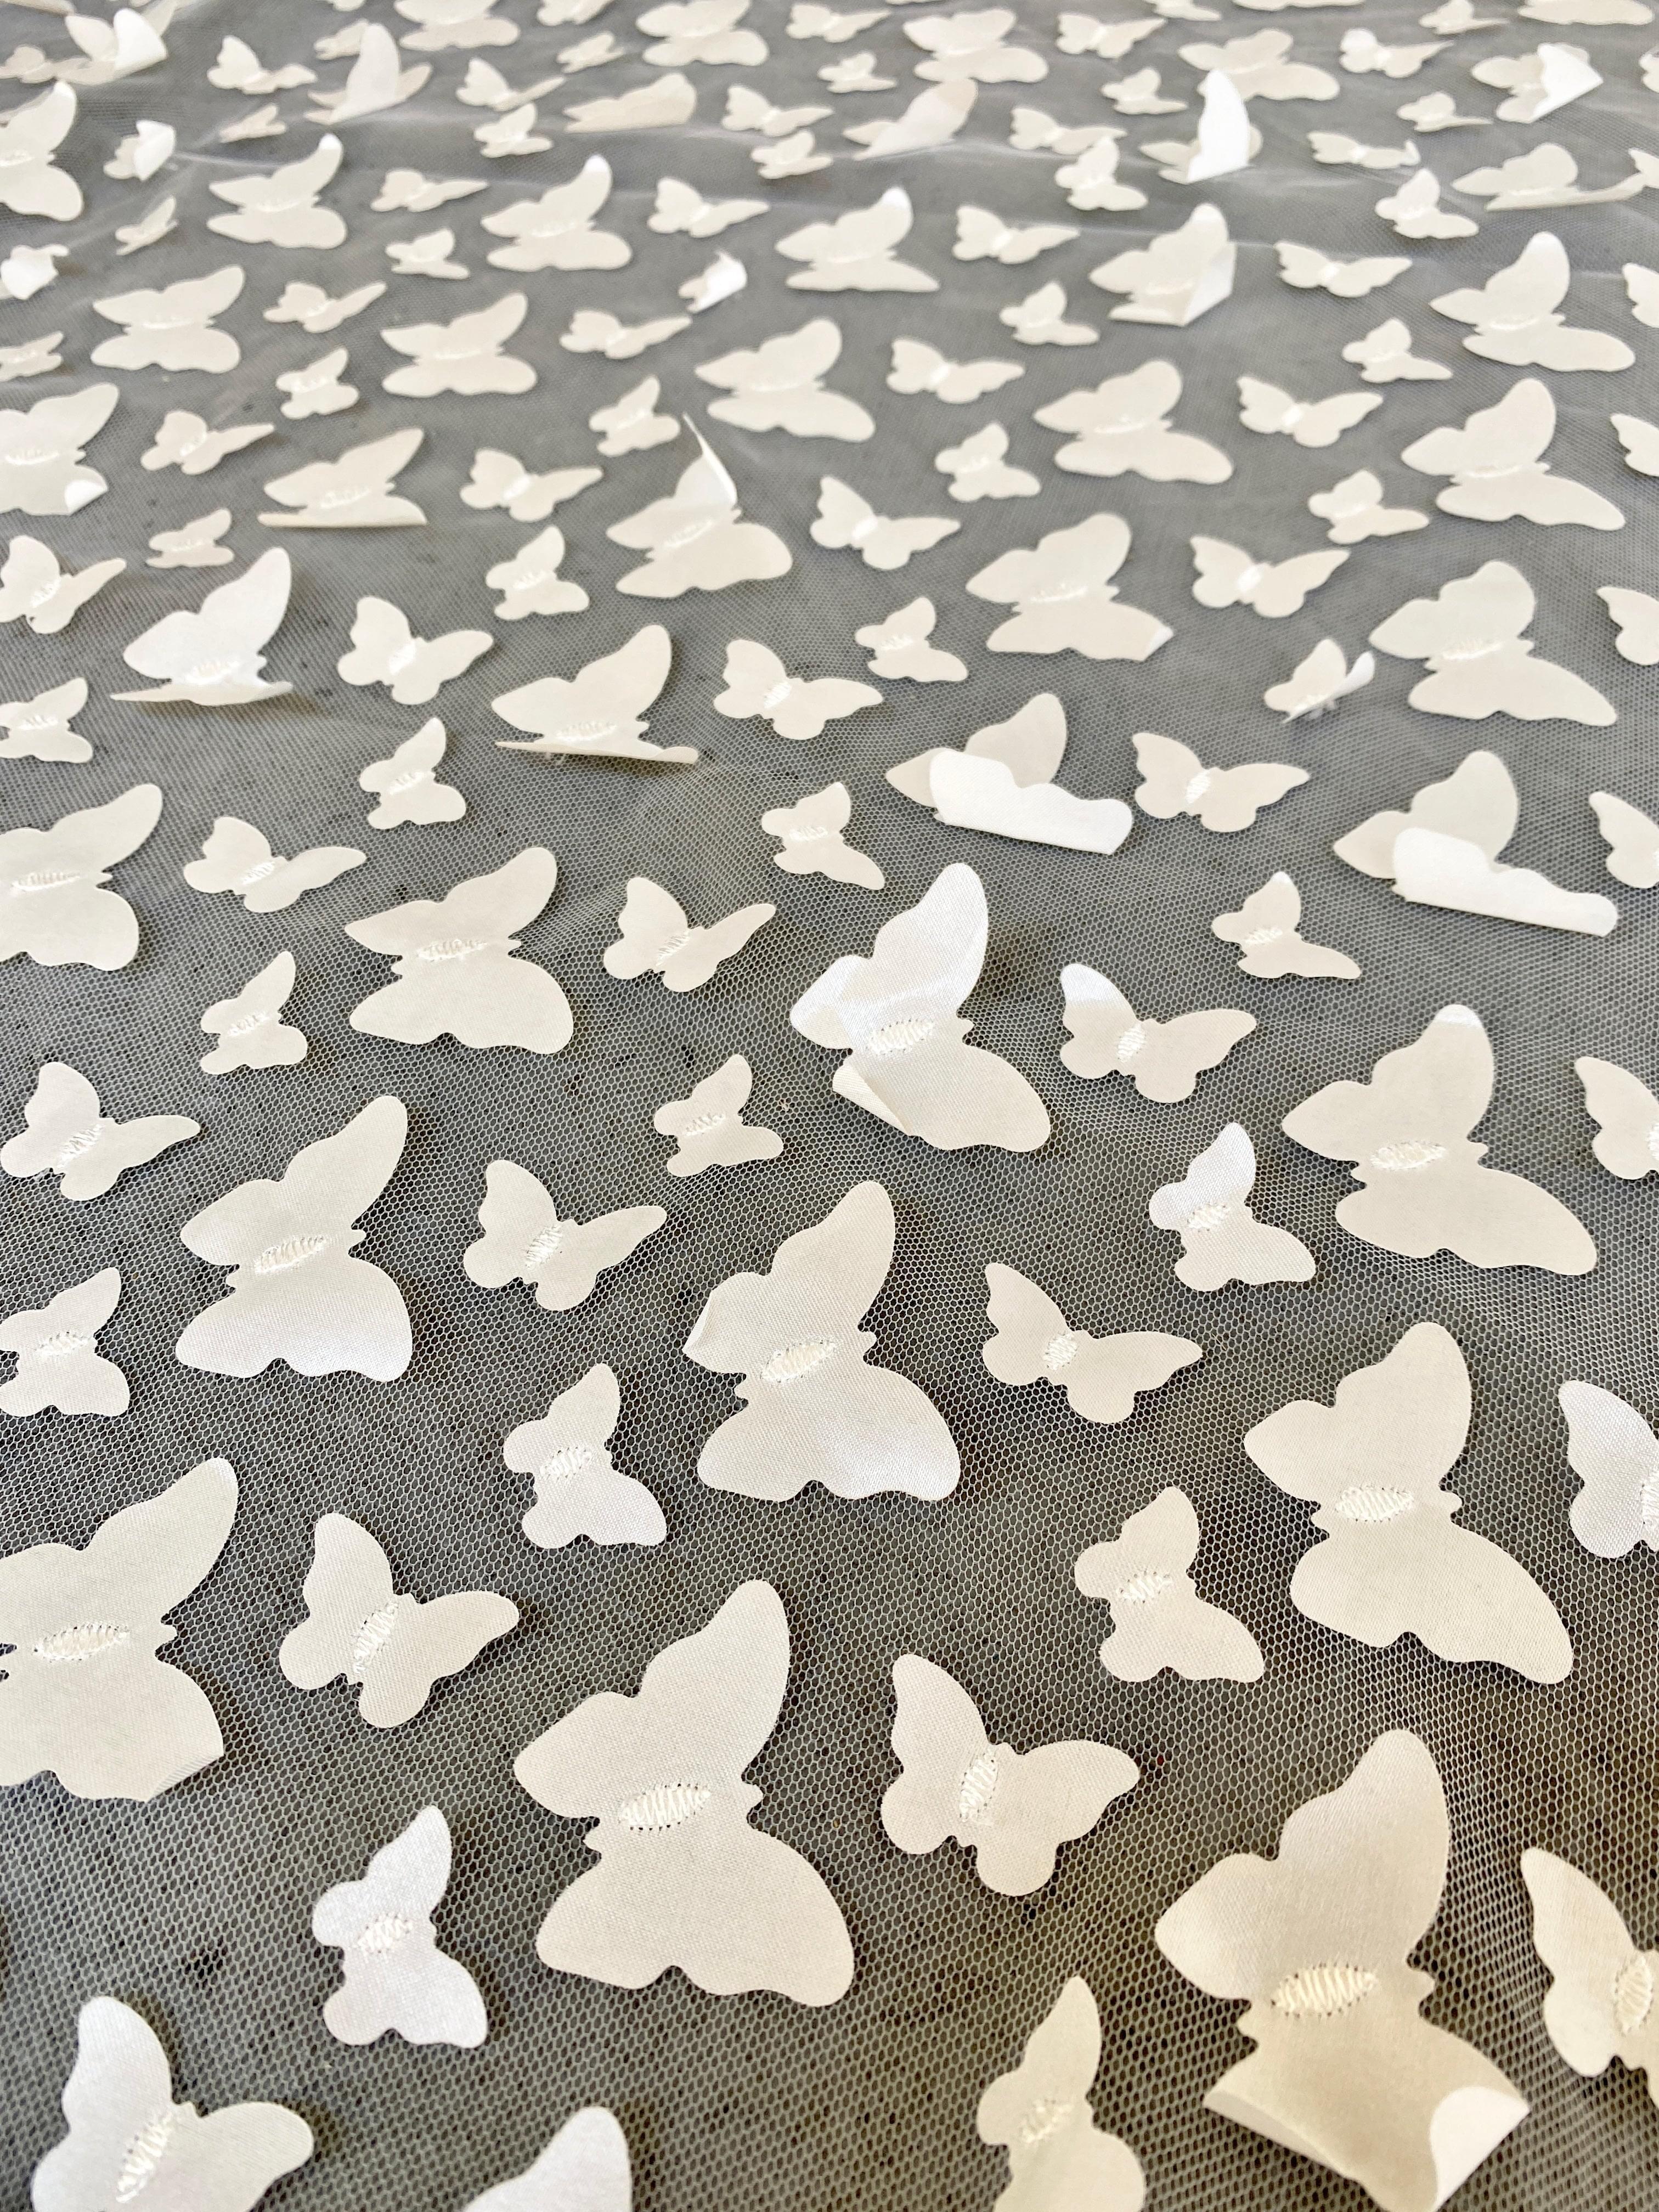 3D Ivory Butterfly Lace